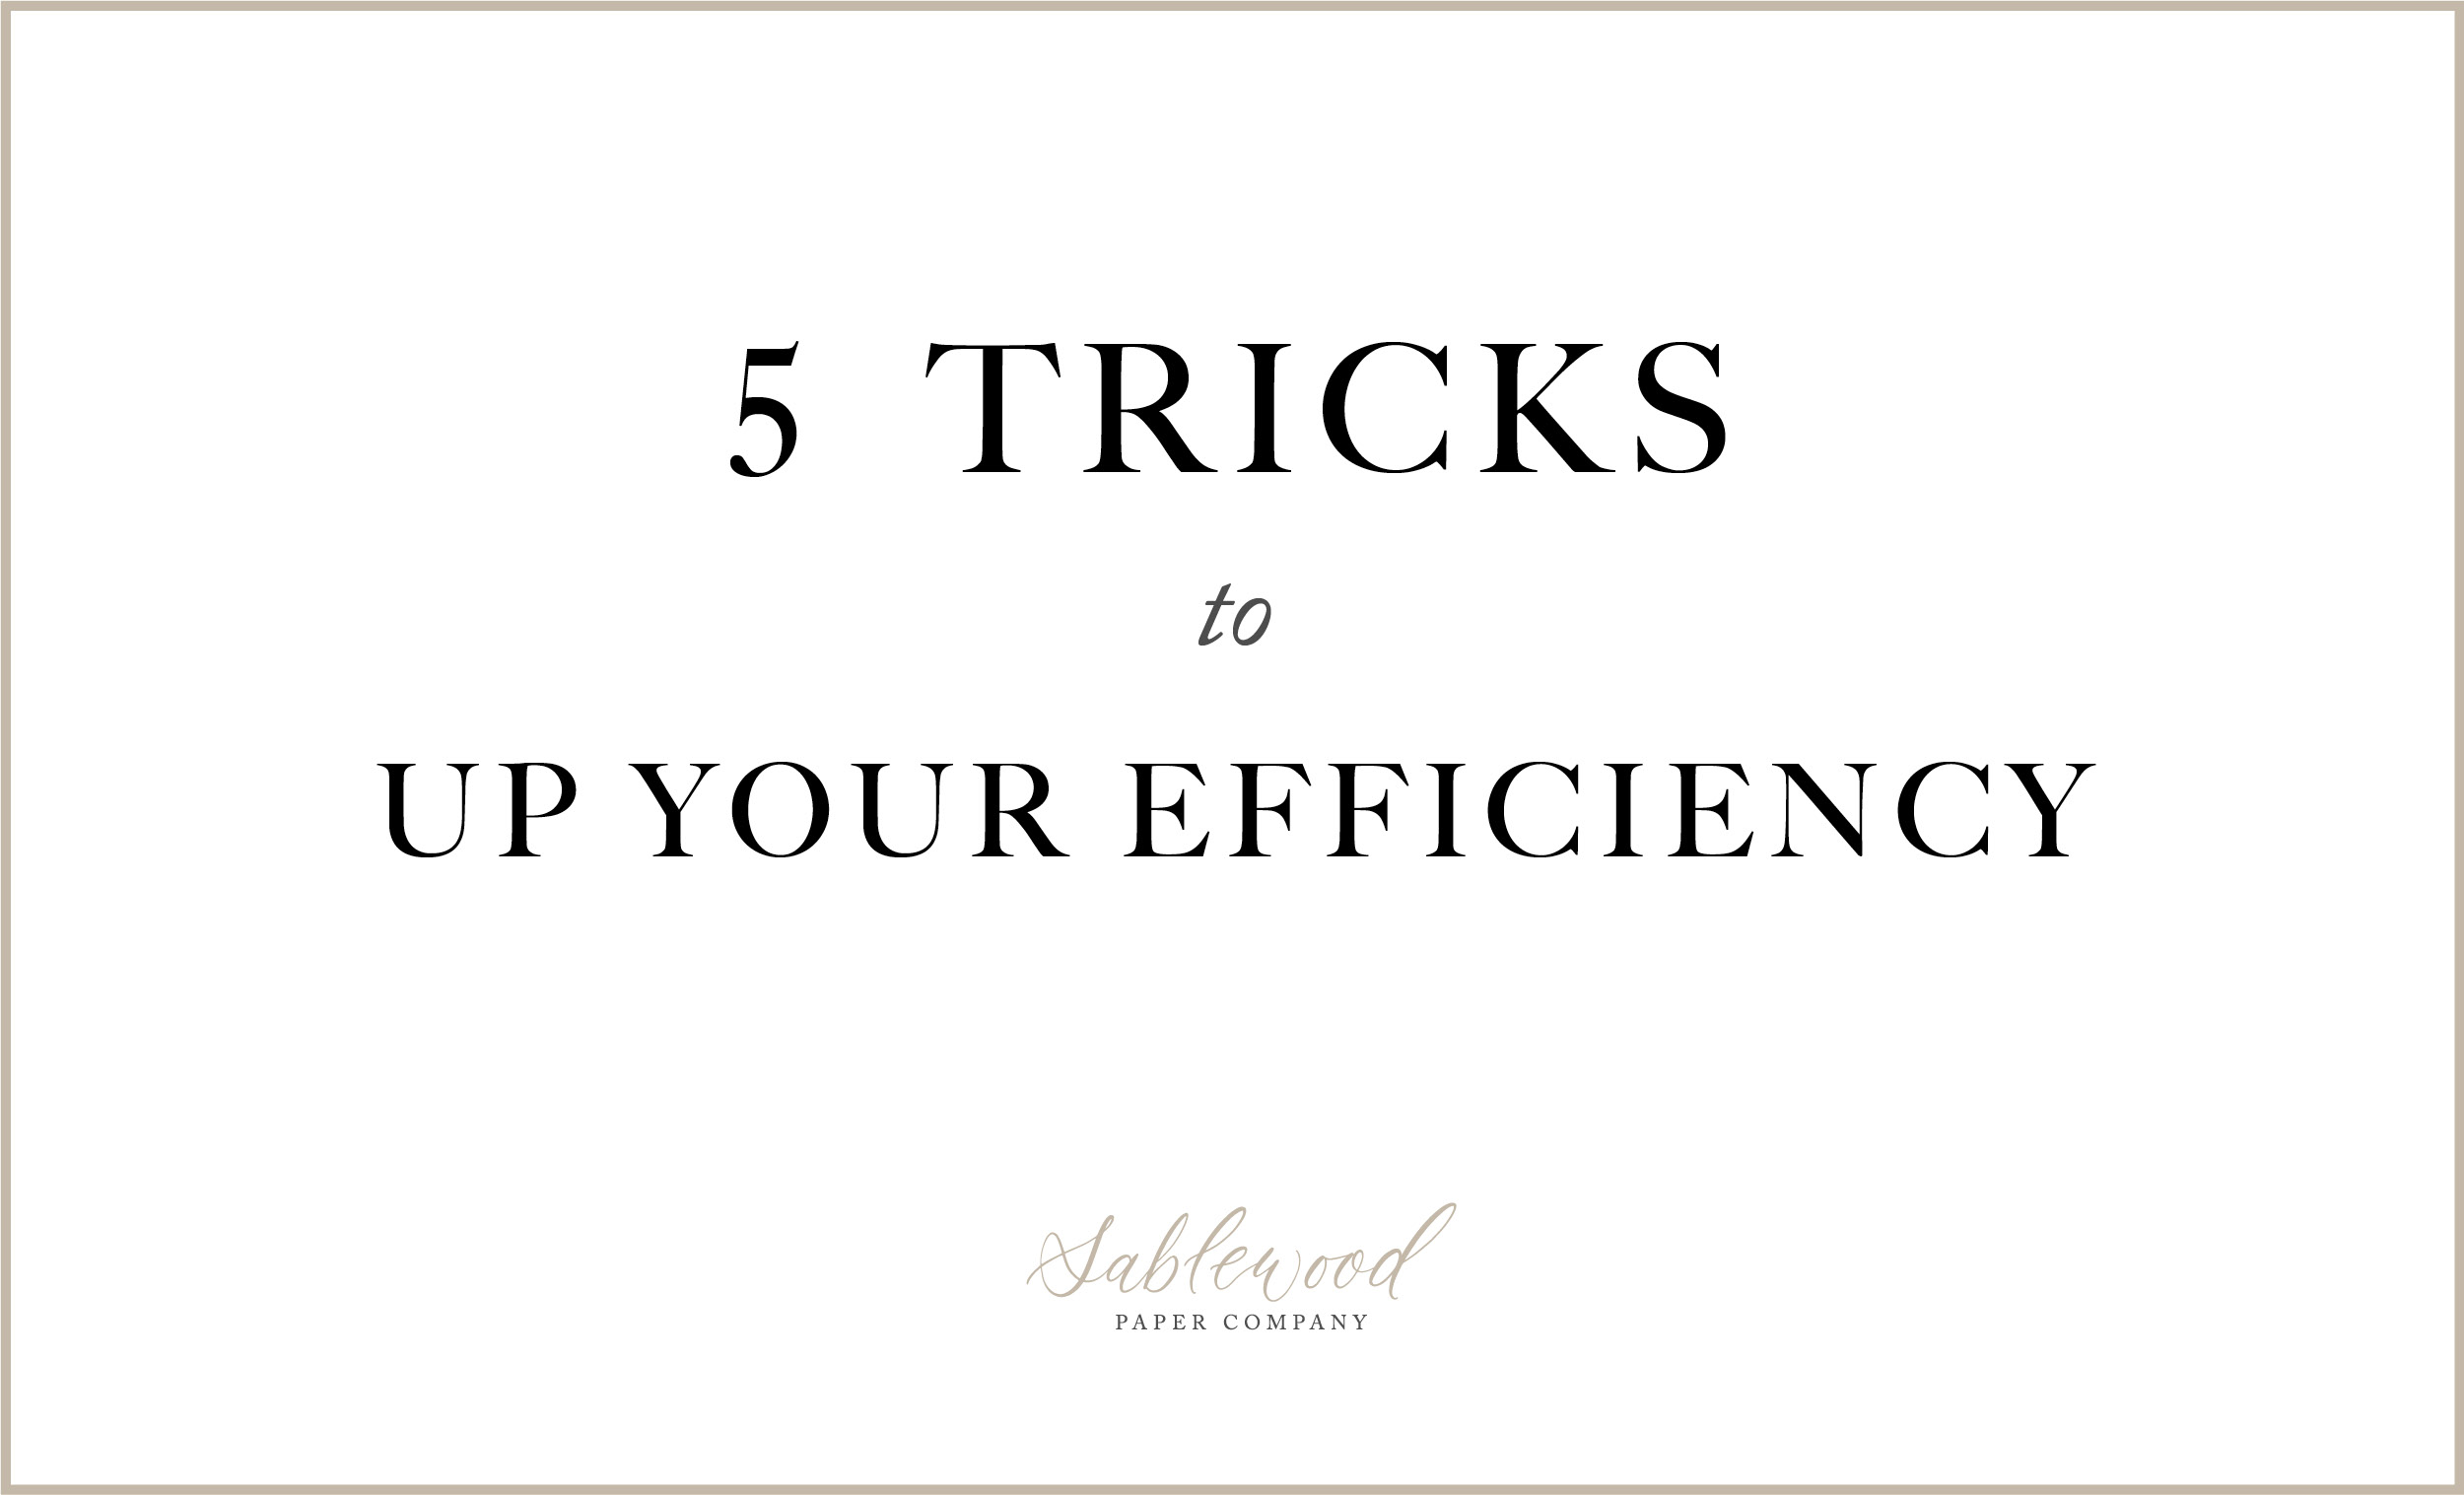 5 Tricks to Up Your Efficiency